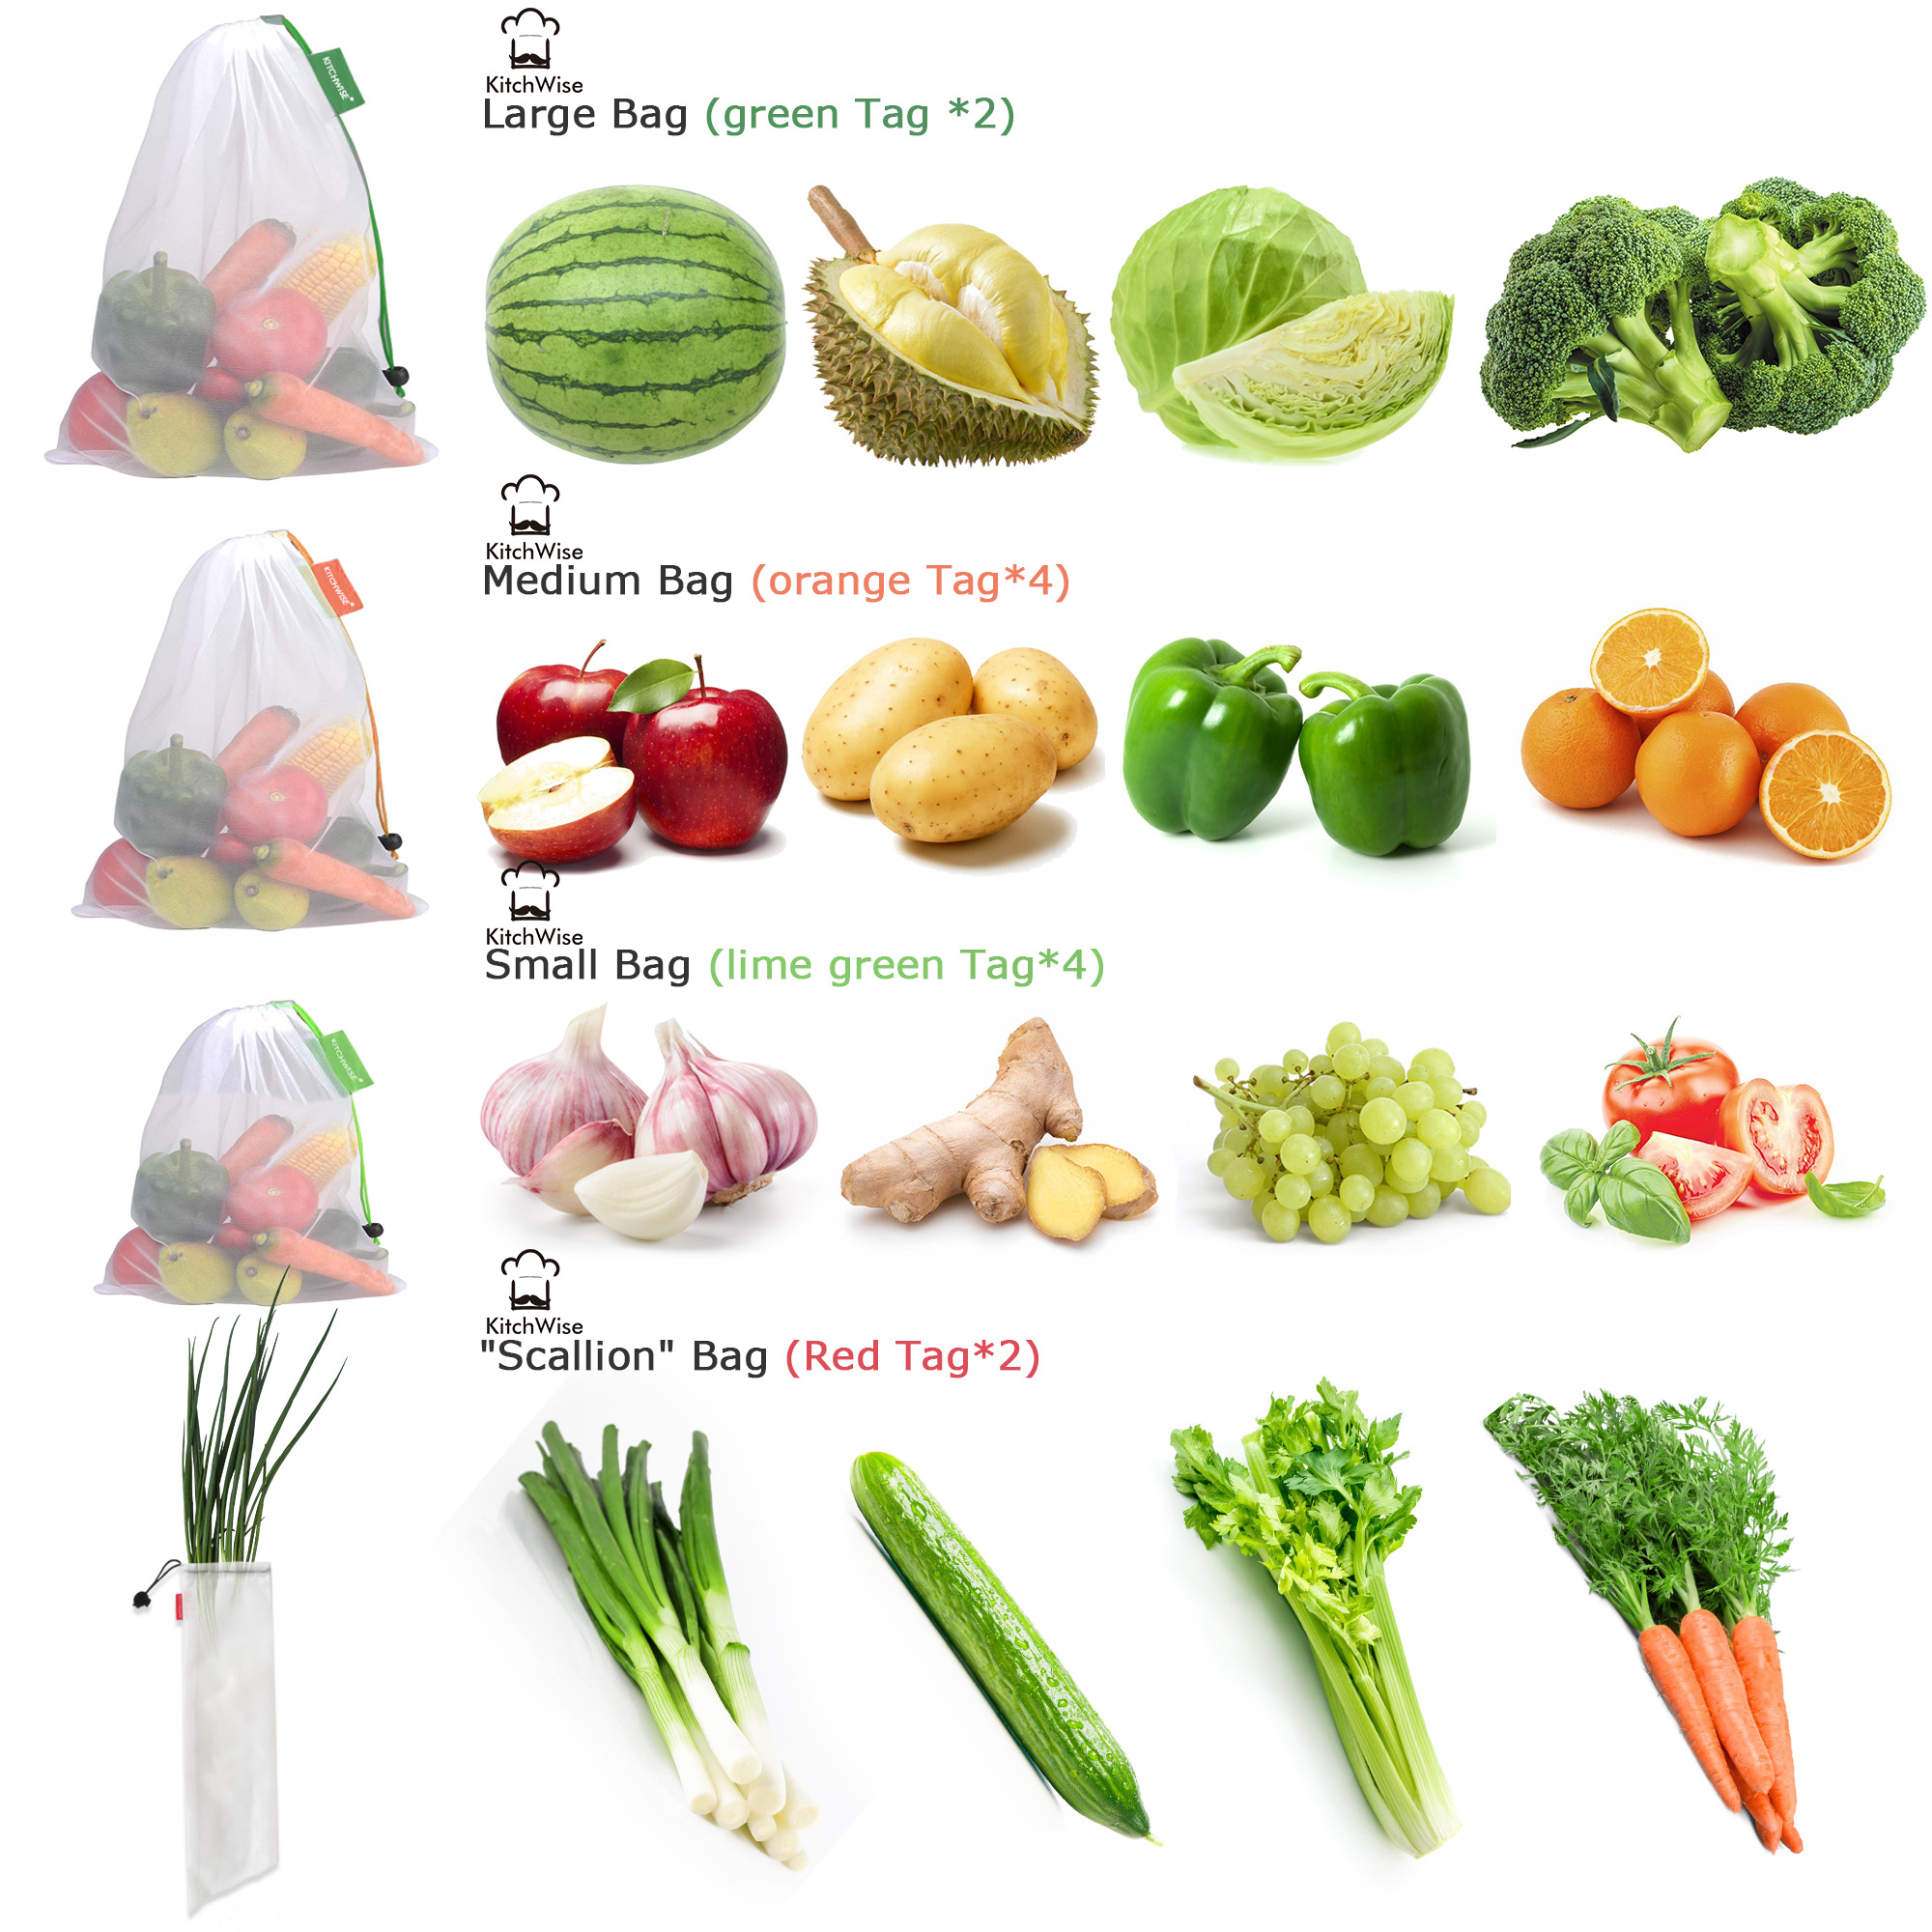 Kitchwise Reusable Grocery Produce Bags Ecofriendly Bags Set of 16